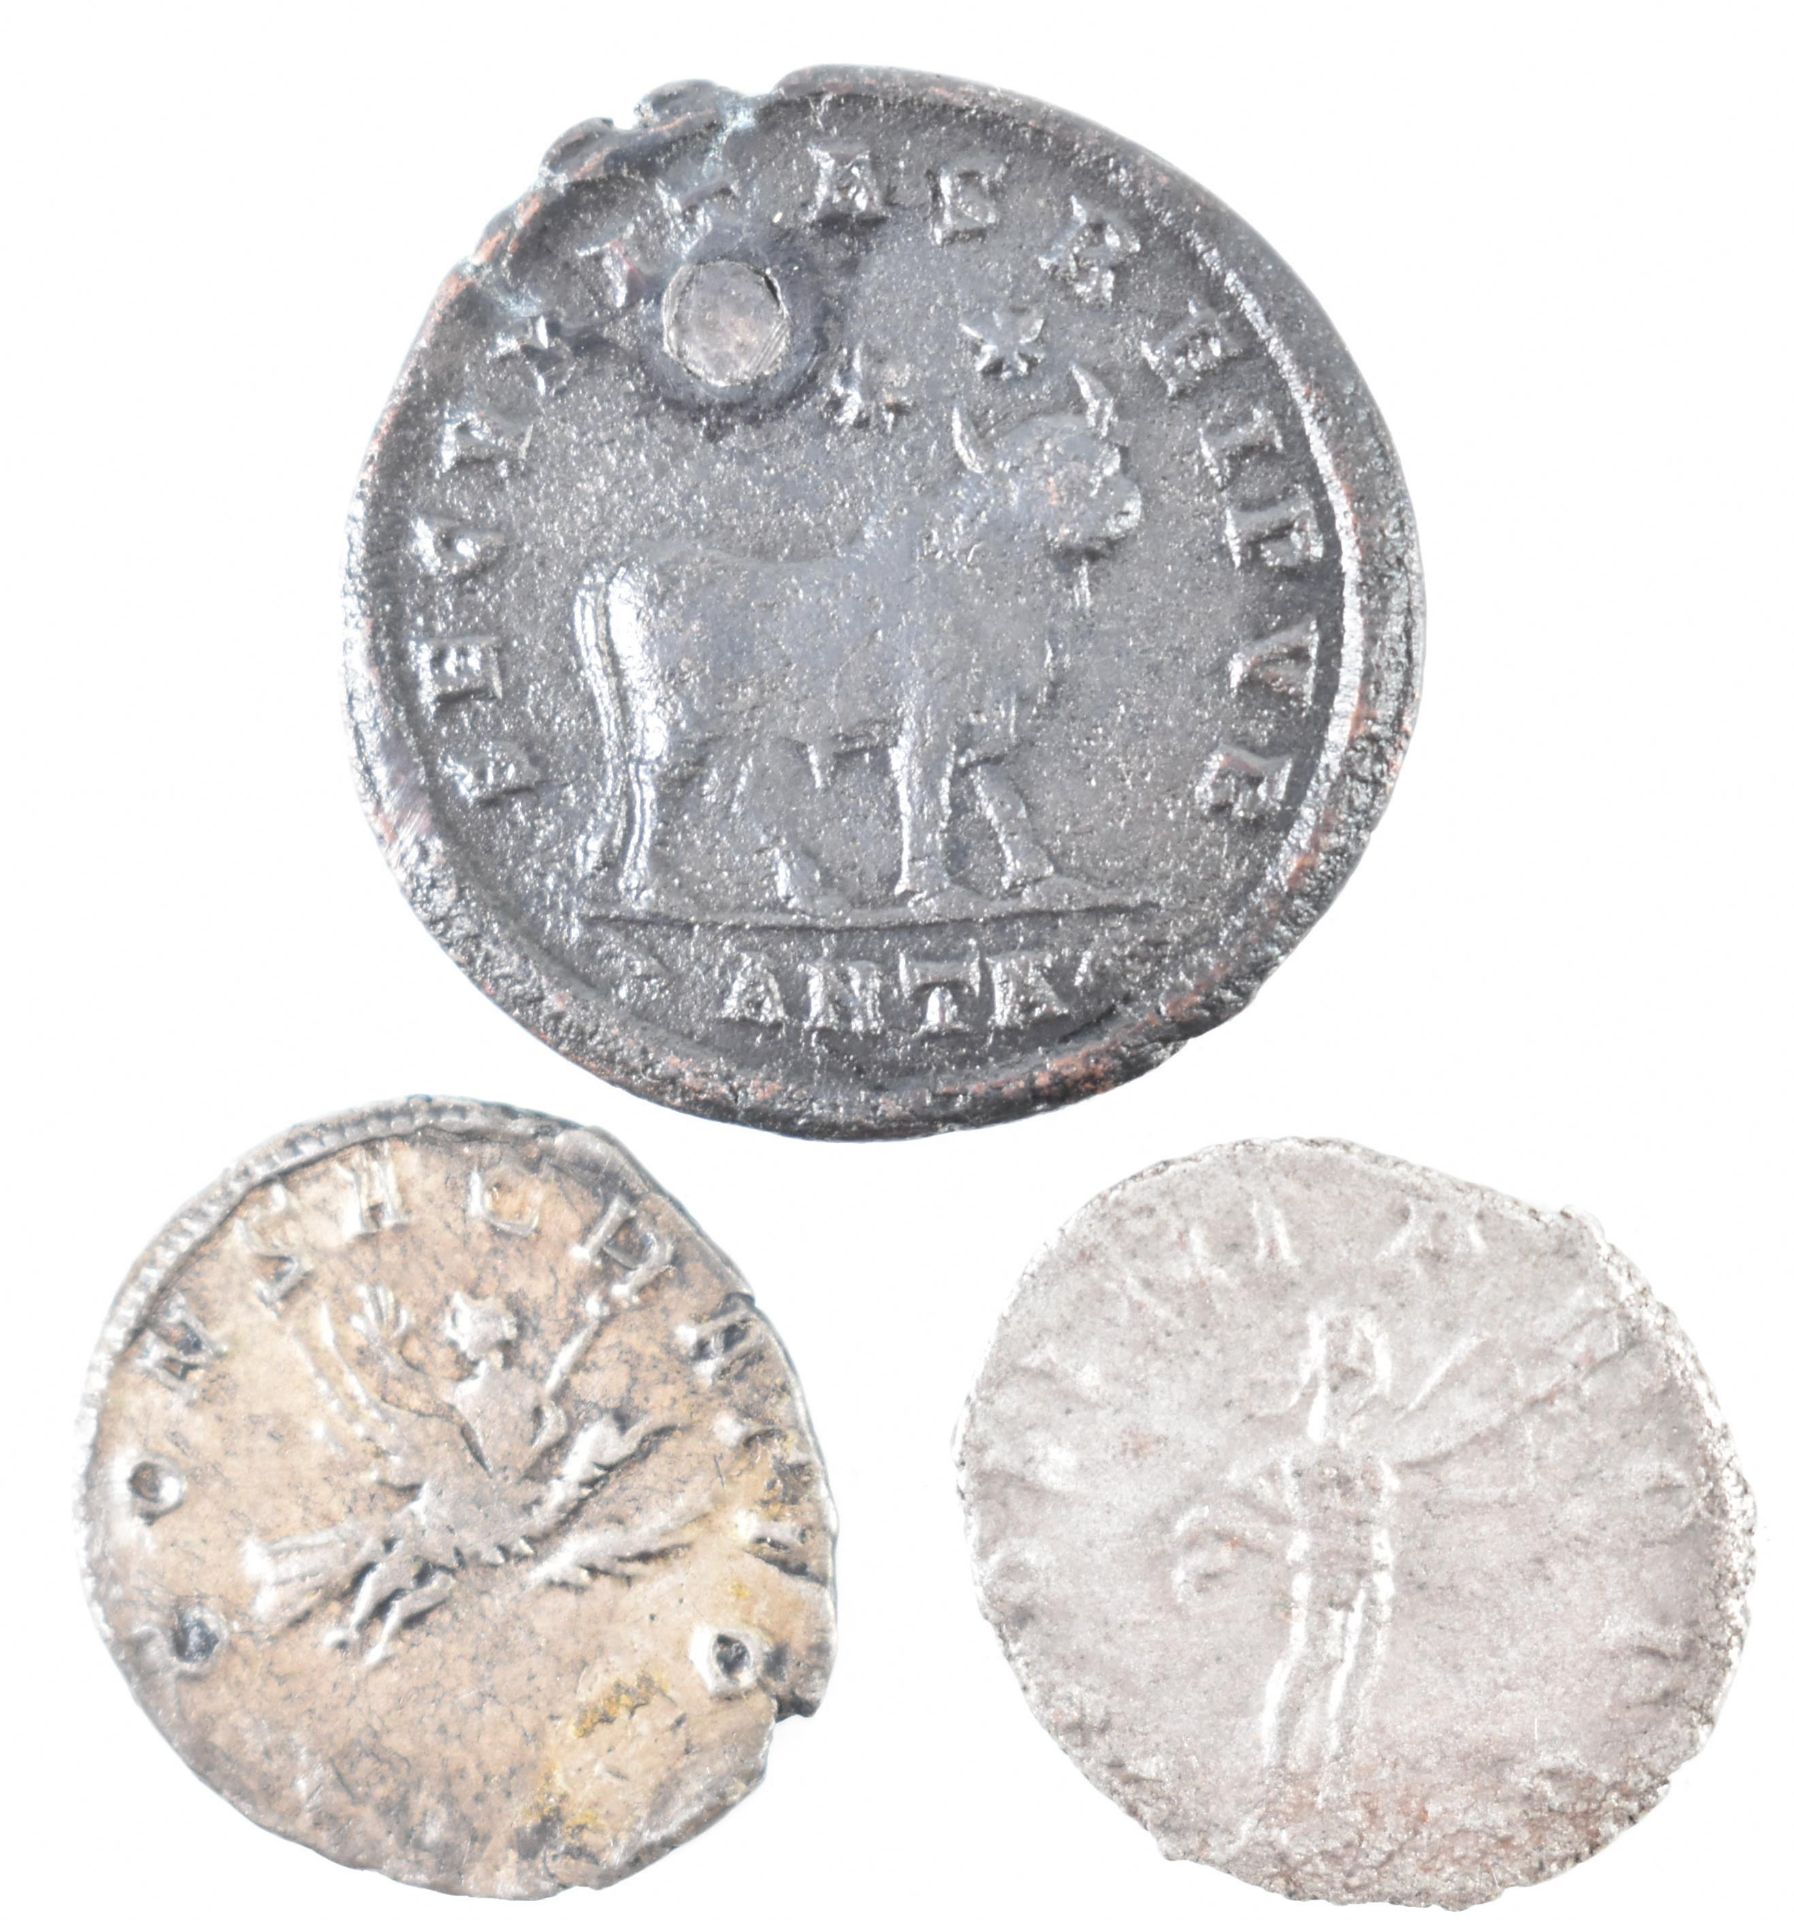 COLLECTION OF ROMAN IMPERIAL COINS - VALERIAN I / II & JULIAN II - Image 2 of 2